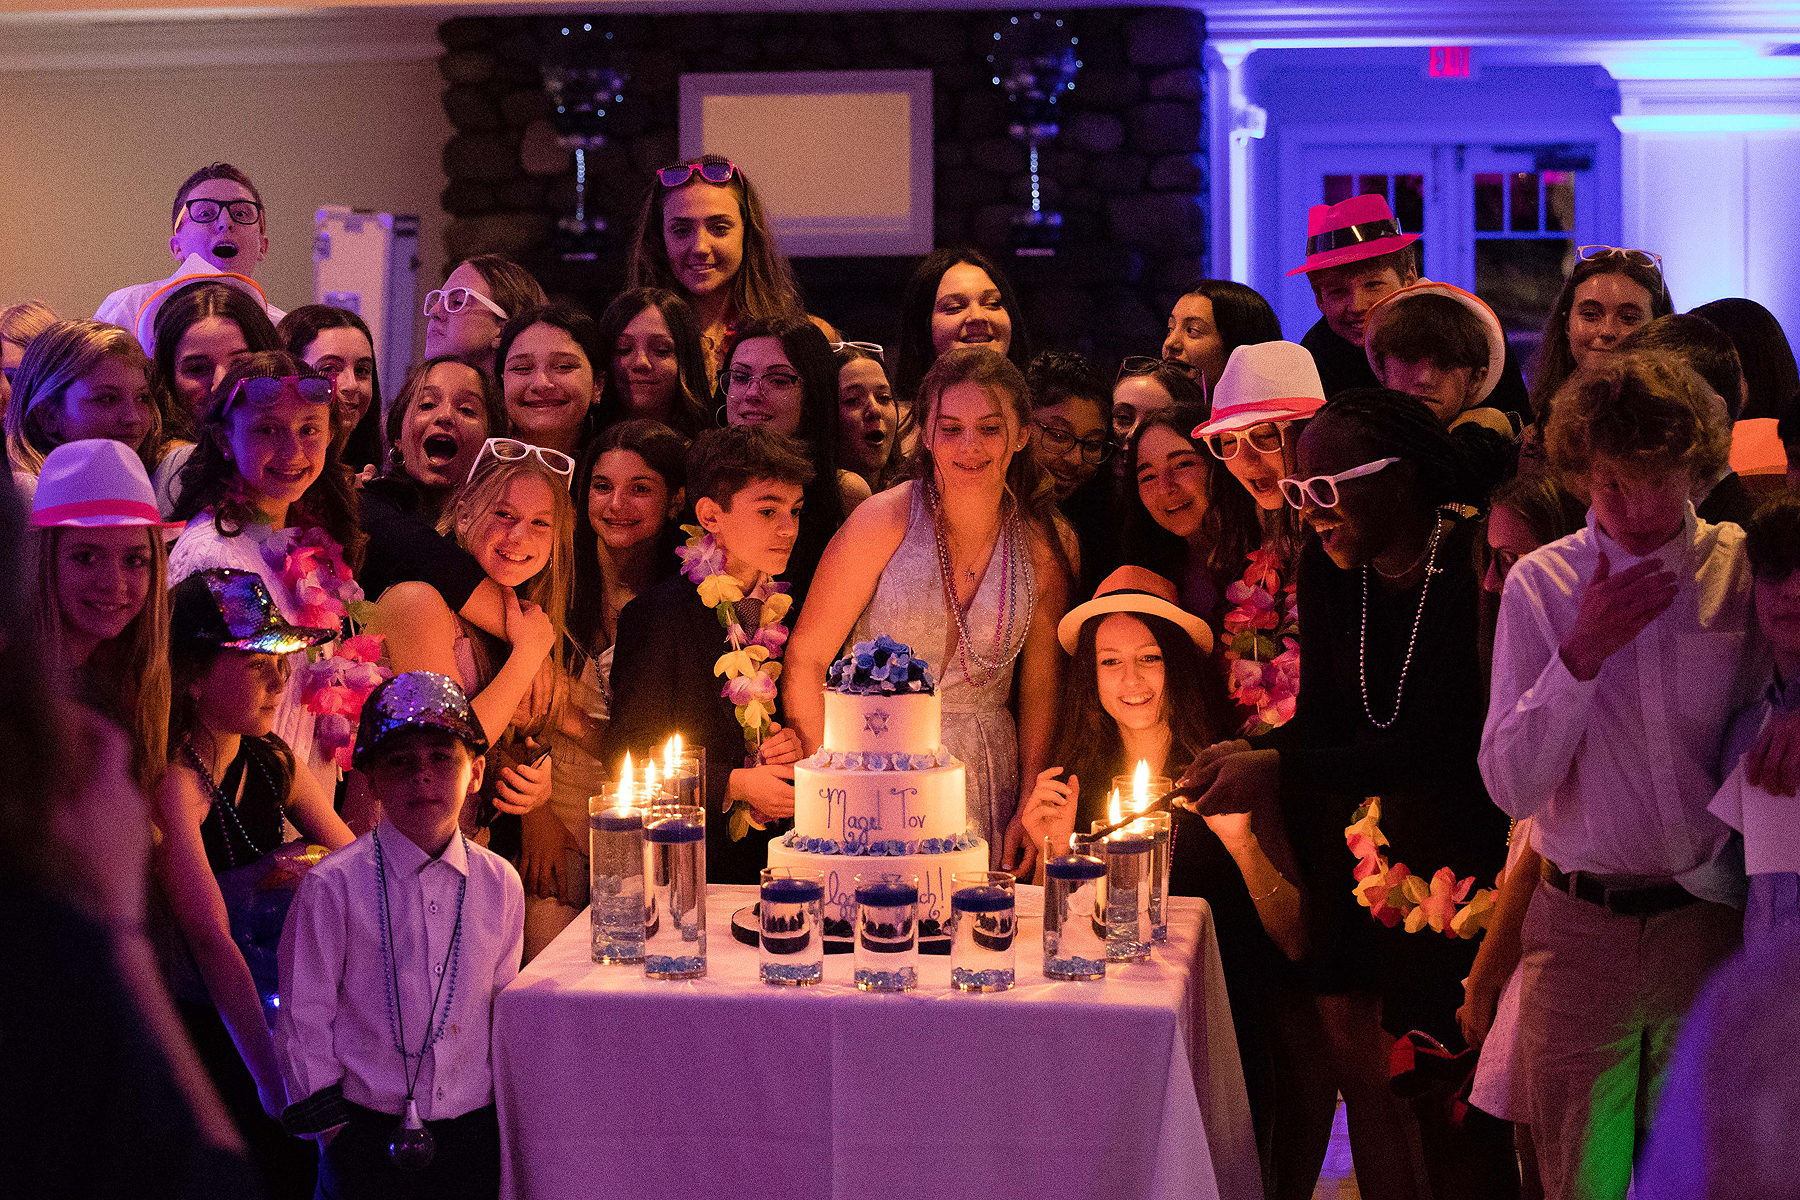 Event photography, Lifestyle photography, memorable moments, special moments, family memories, lifetime memories, bnai mitzvah, bar mitzvah, bat mitzvah